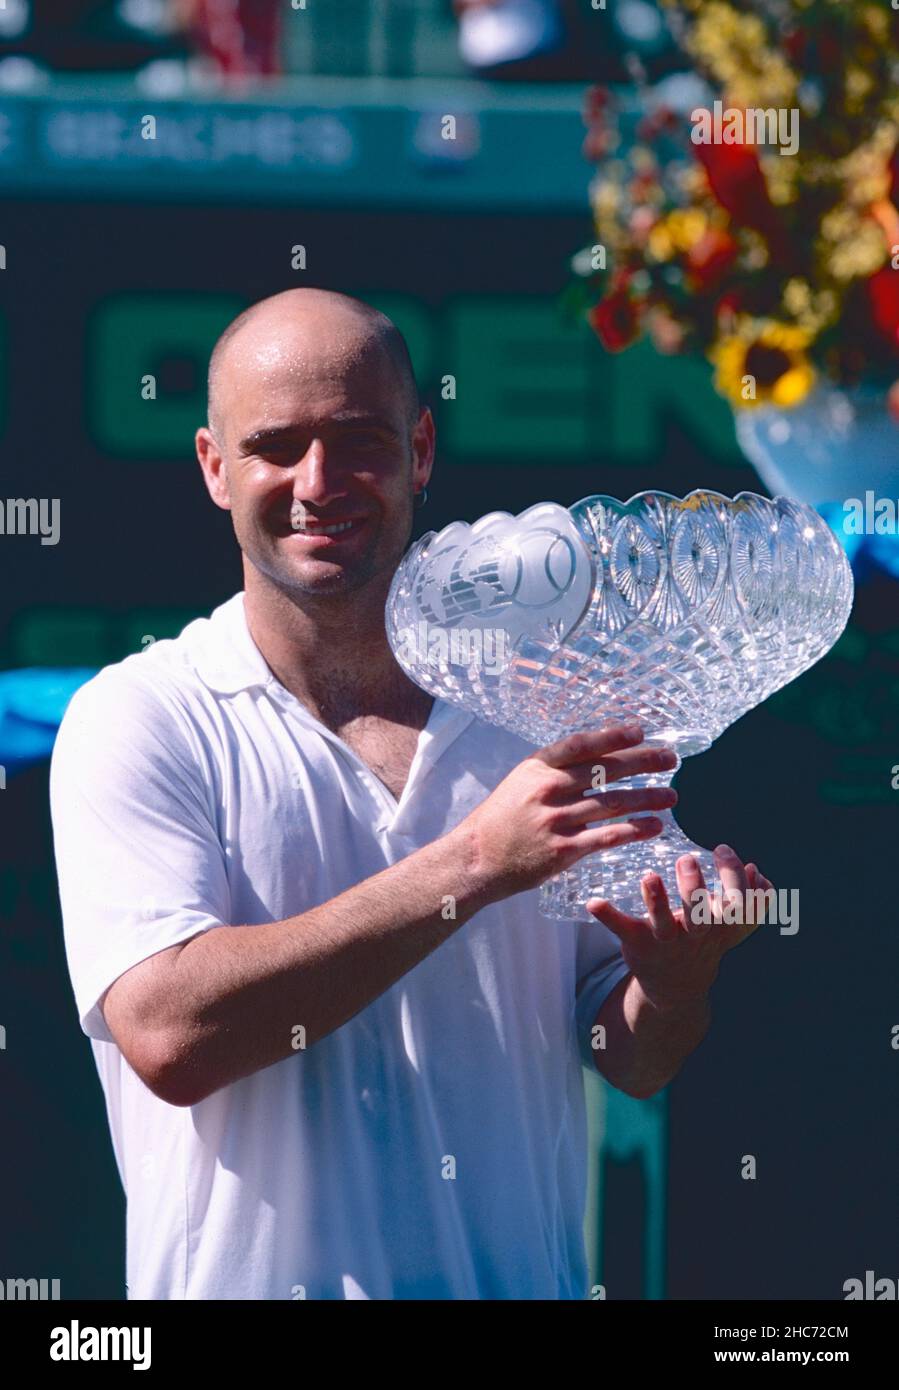 American tennis player Andre Agassi, 2002 Stock Photo